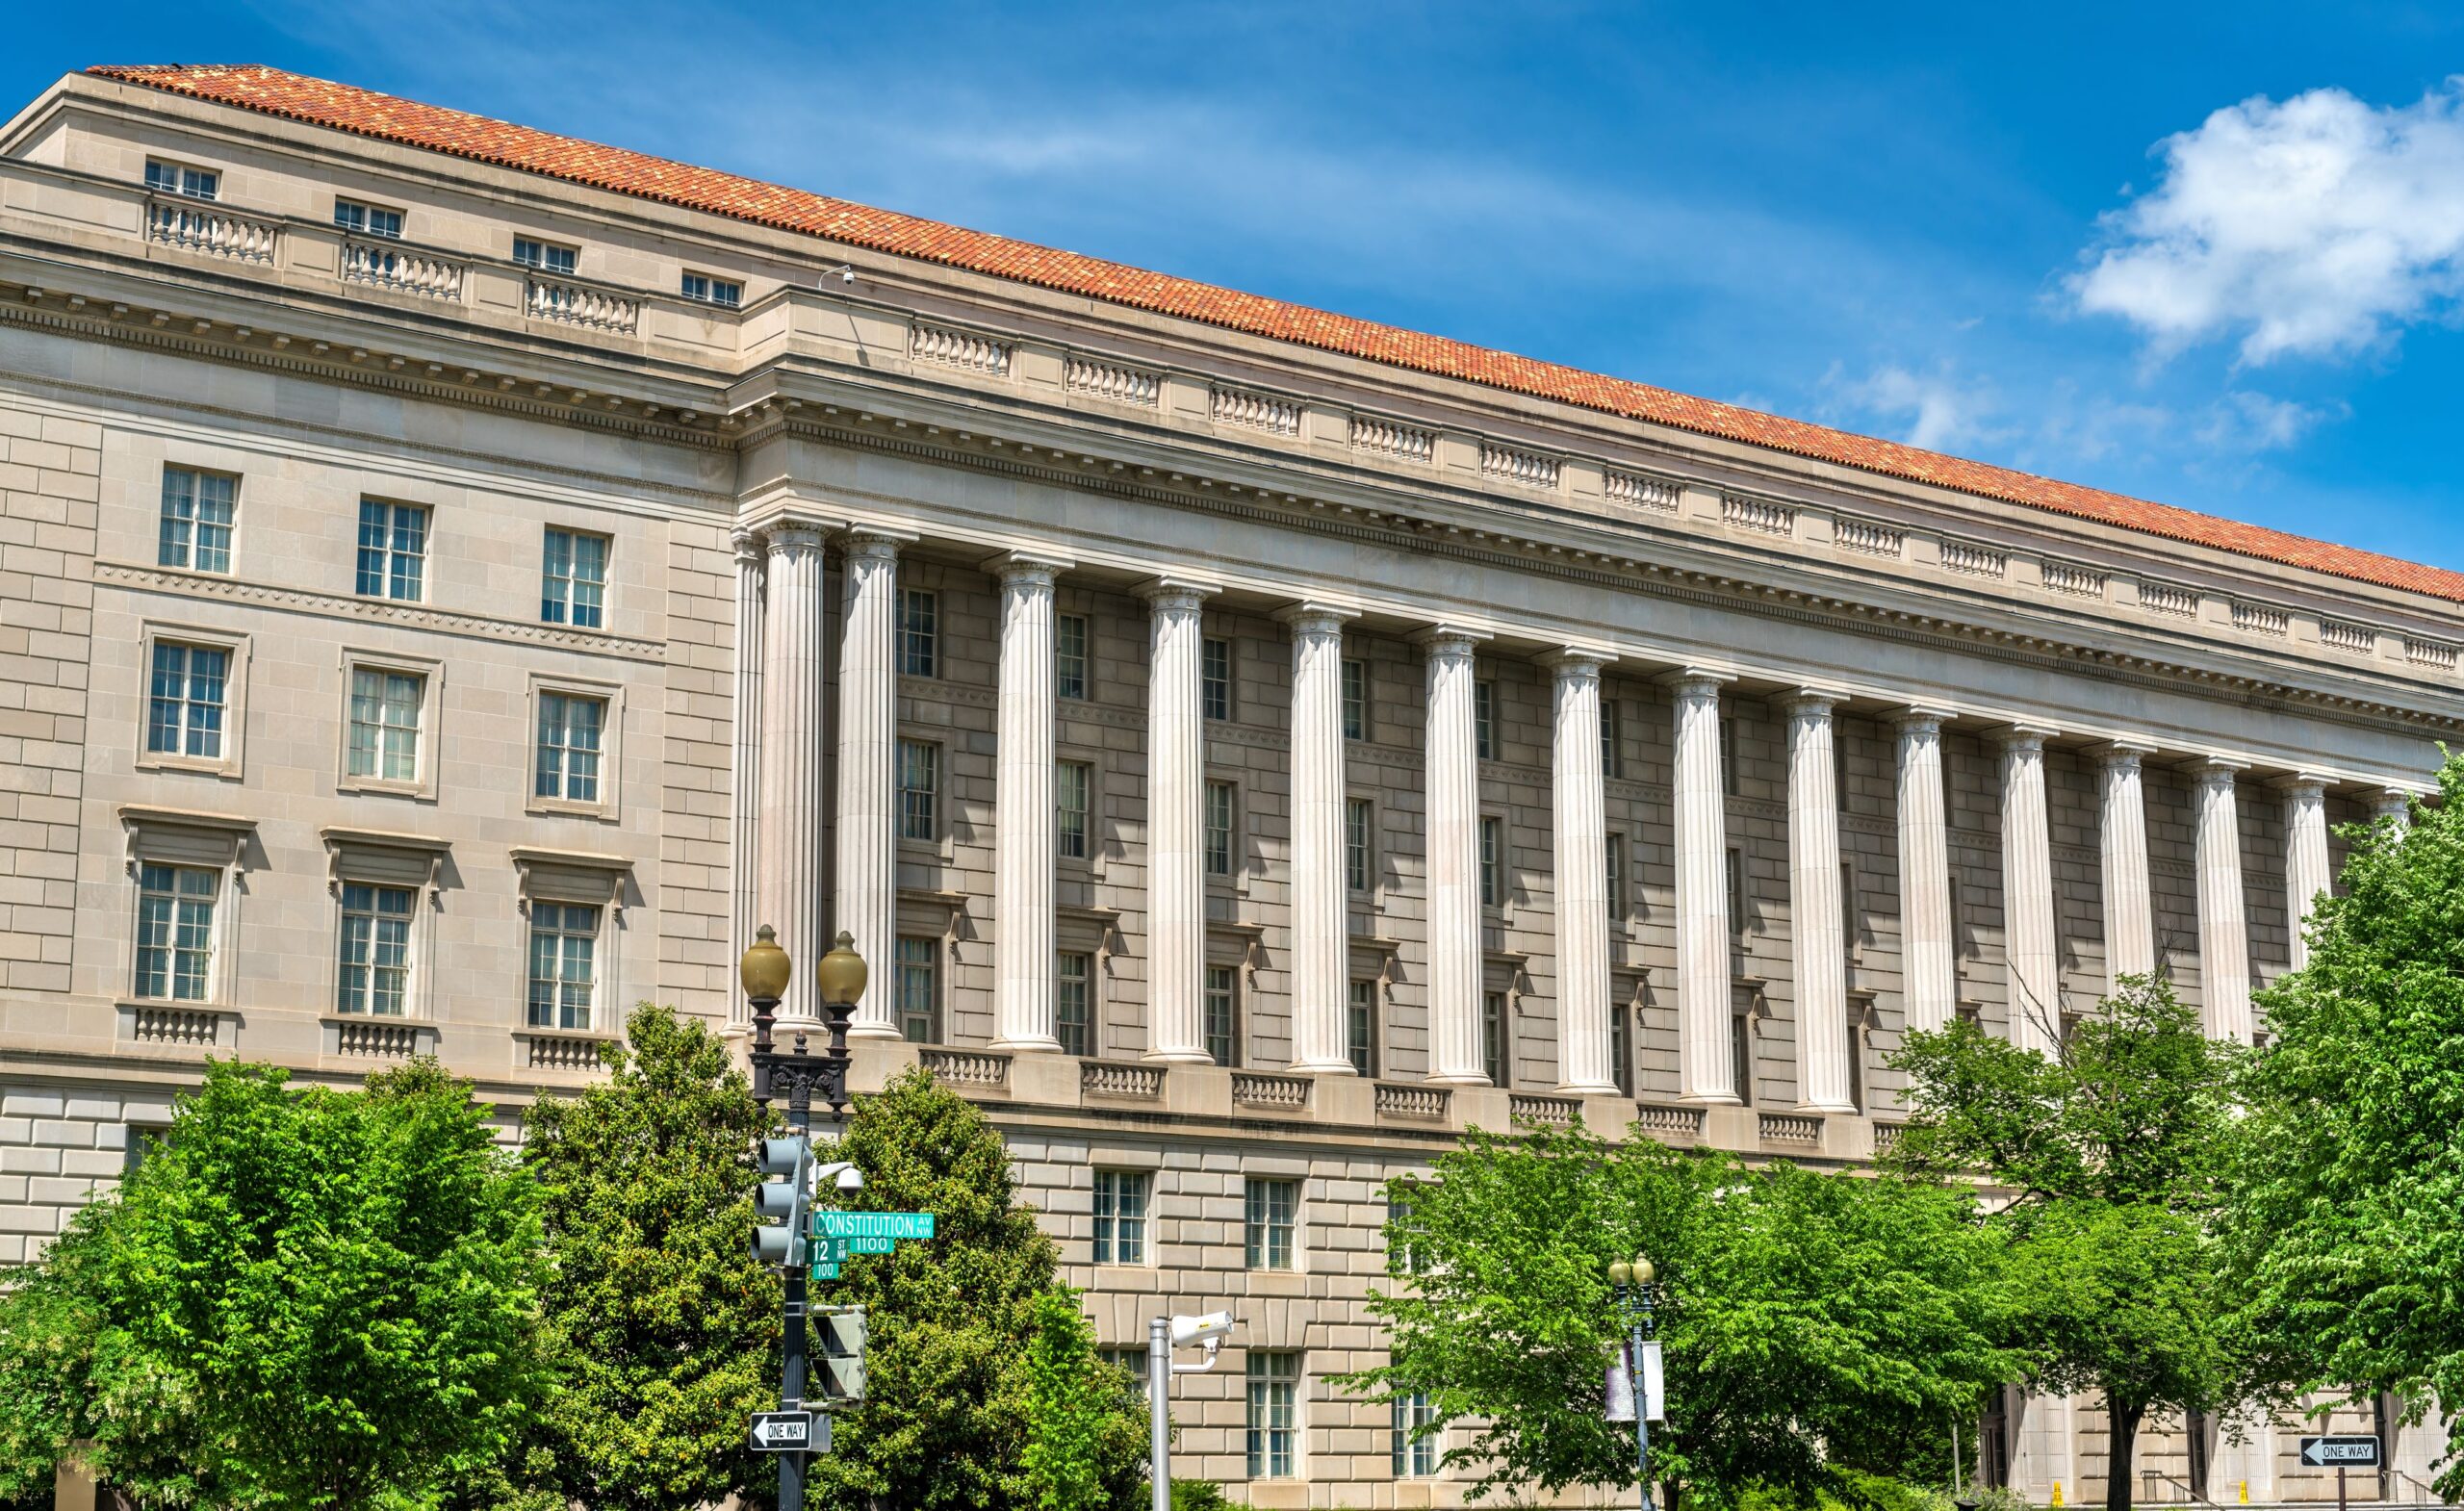 The exterior of the IRS building in Washington, DC.